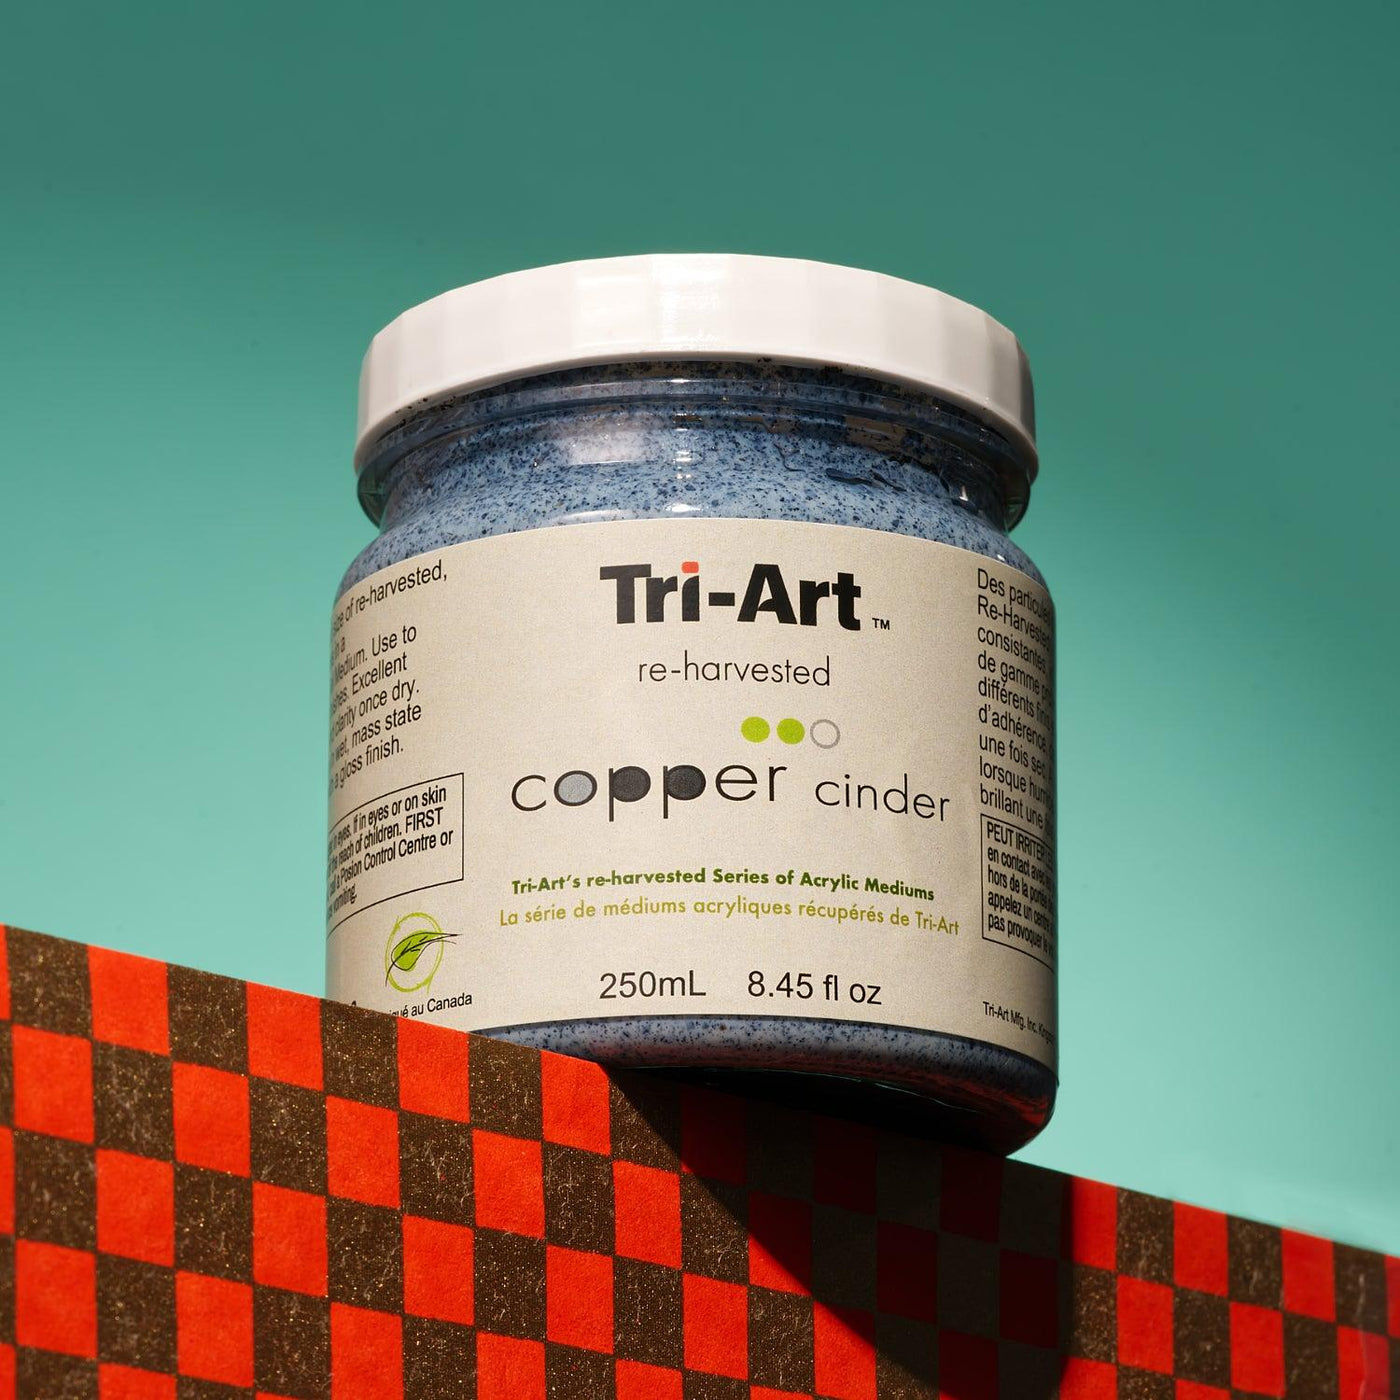 This is an image of a jar of Copper Cinder texture medium in the Tri-Art Acrylic Mediums line.